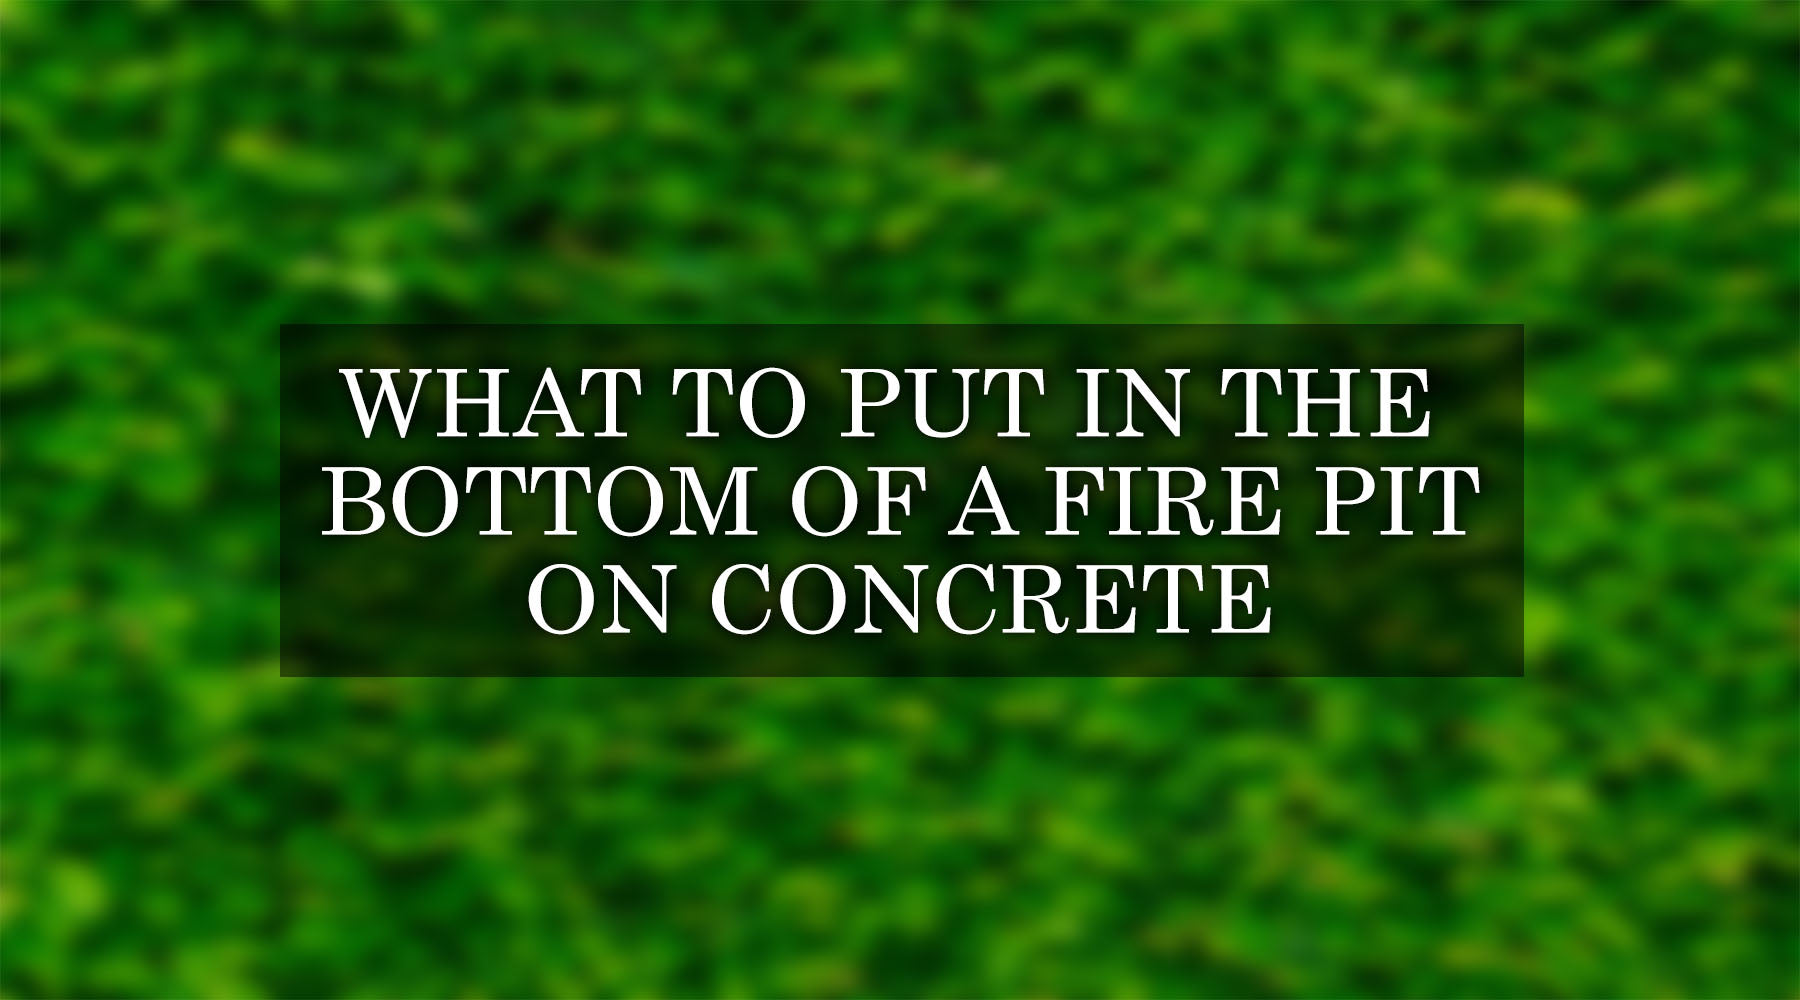 What to Put in the Bottom of a Fire Pit on Concrete